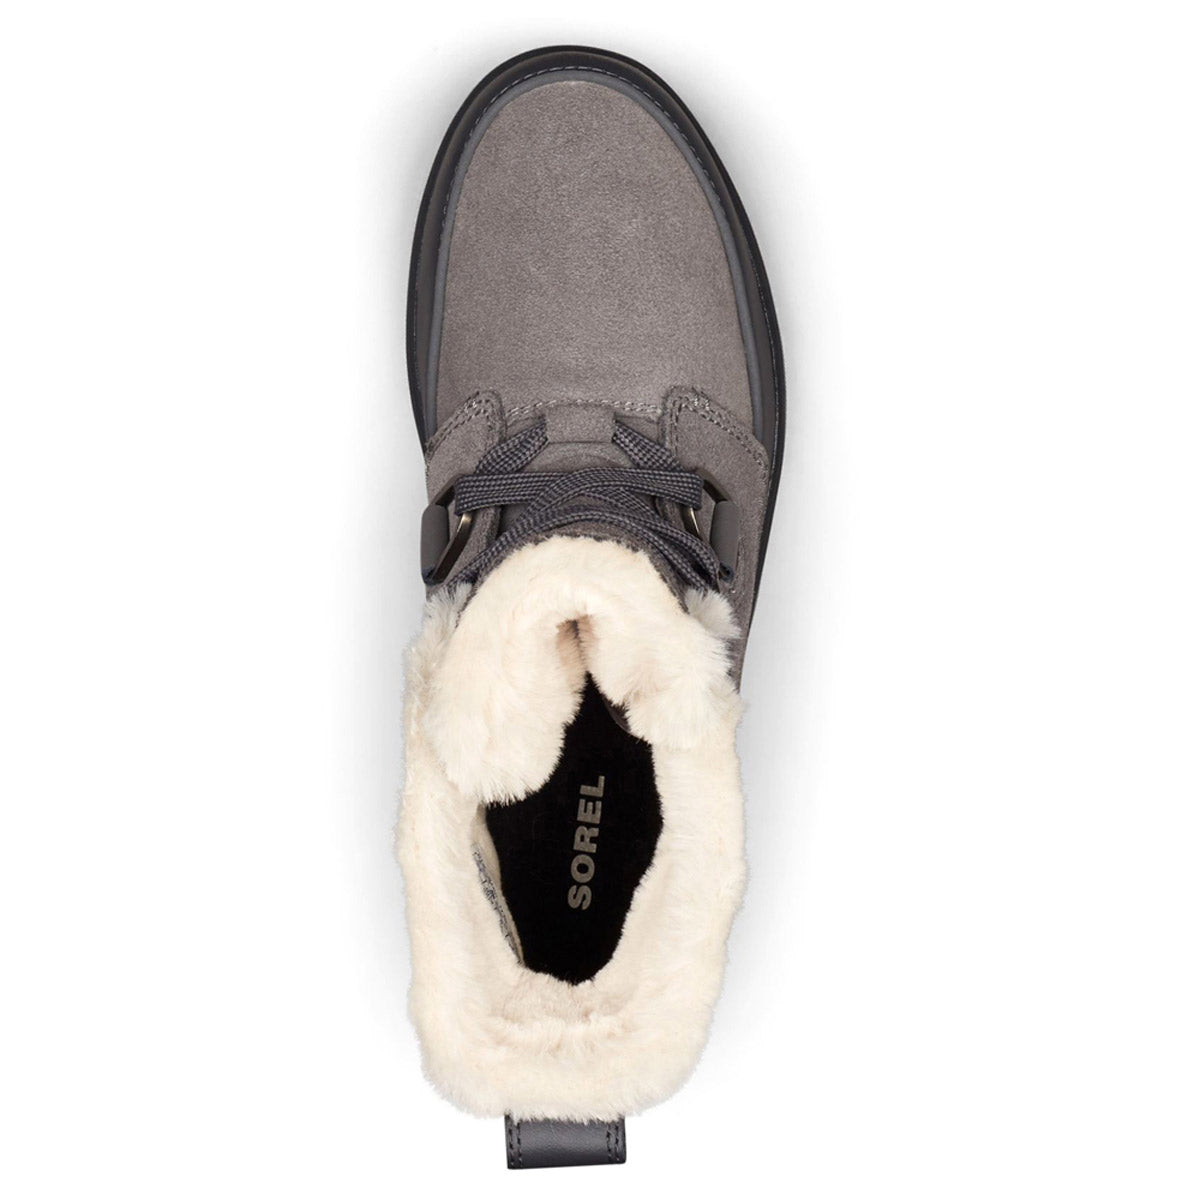 Top-down view of the Sorel Tivoli IV Quarry - Womens waterproof suede boot with a fur lining.